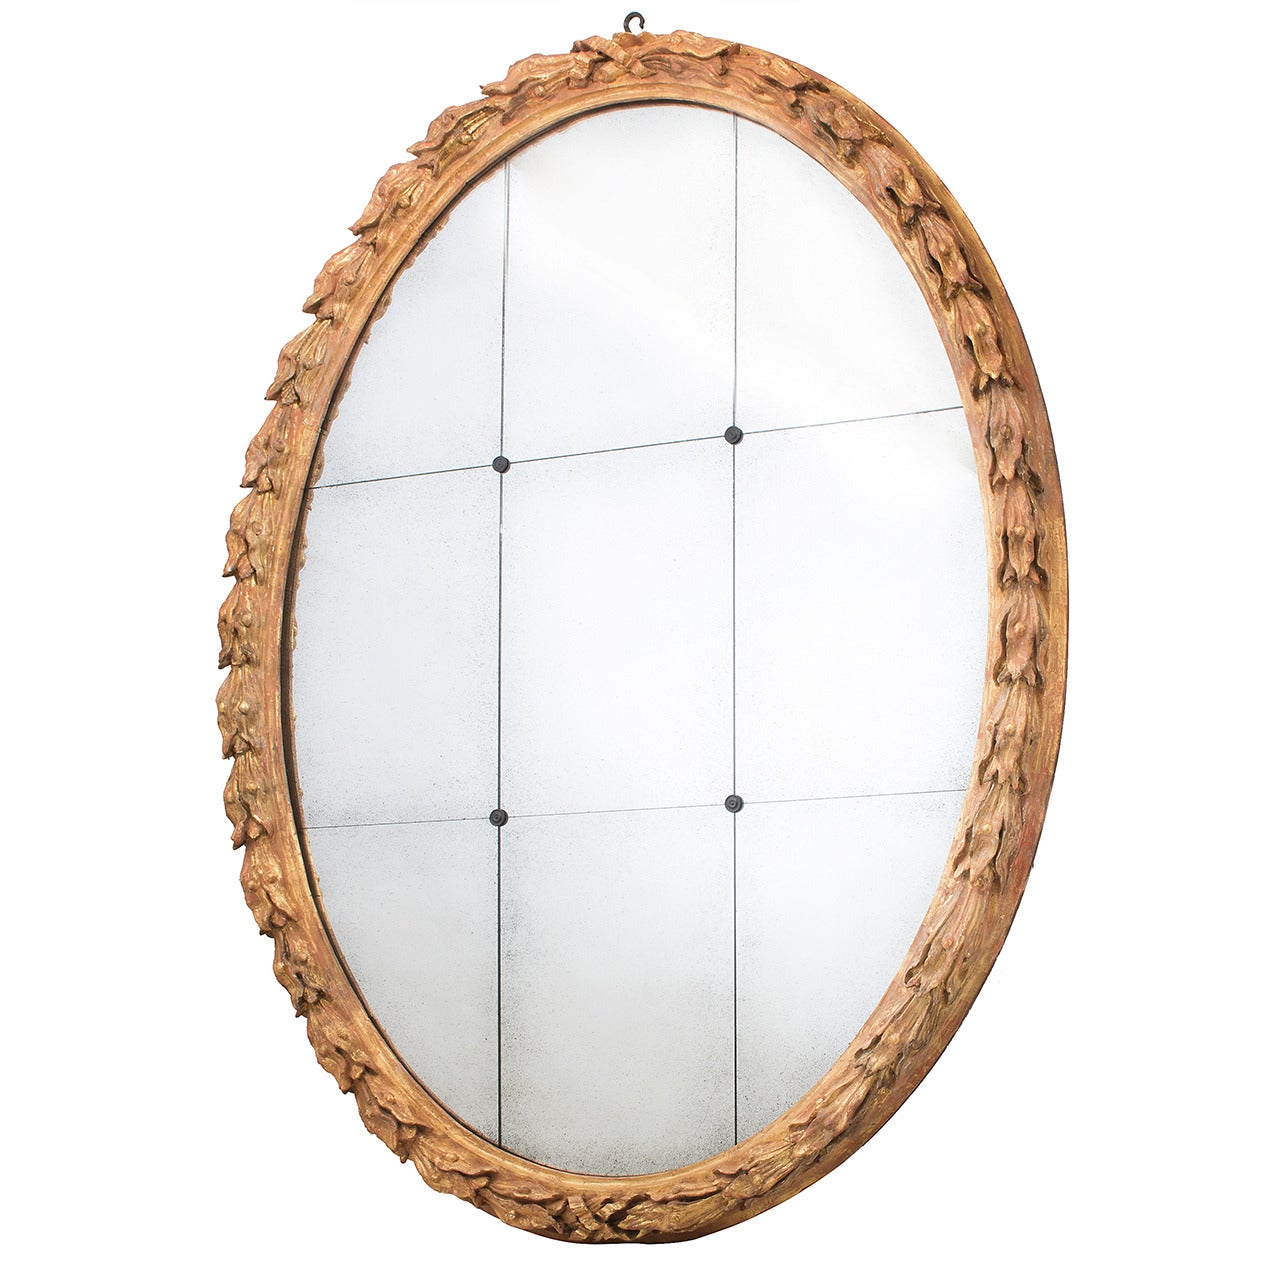 Monumental Tuscan Oval Carved Giltwood Framed Mirror, circa 1700